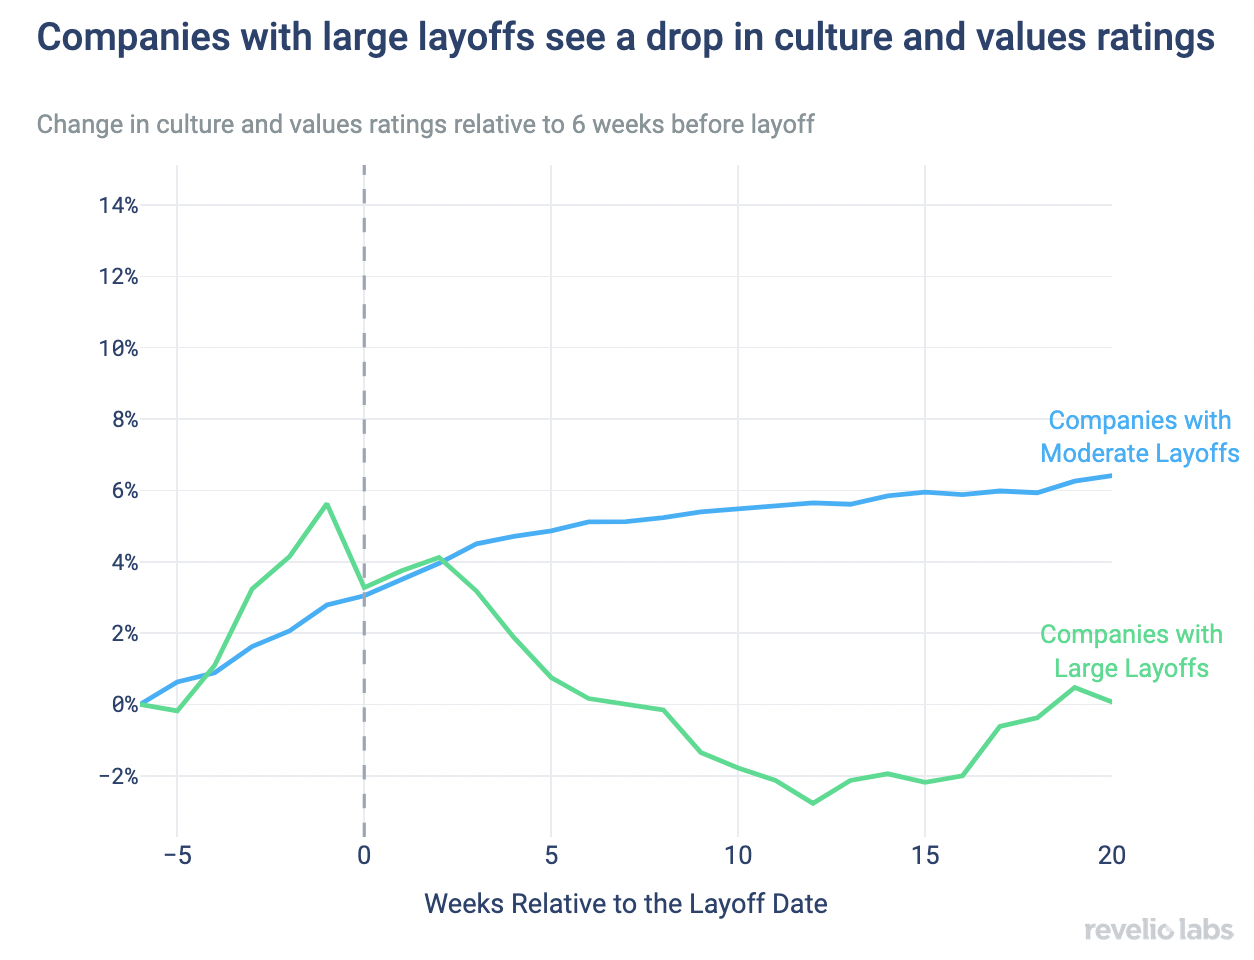 Companies with large layoffs see a drop in culture and values ratings